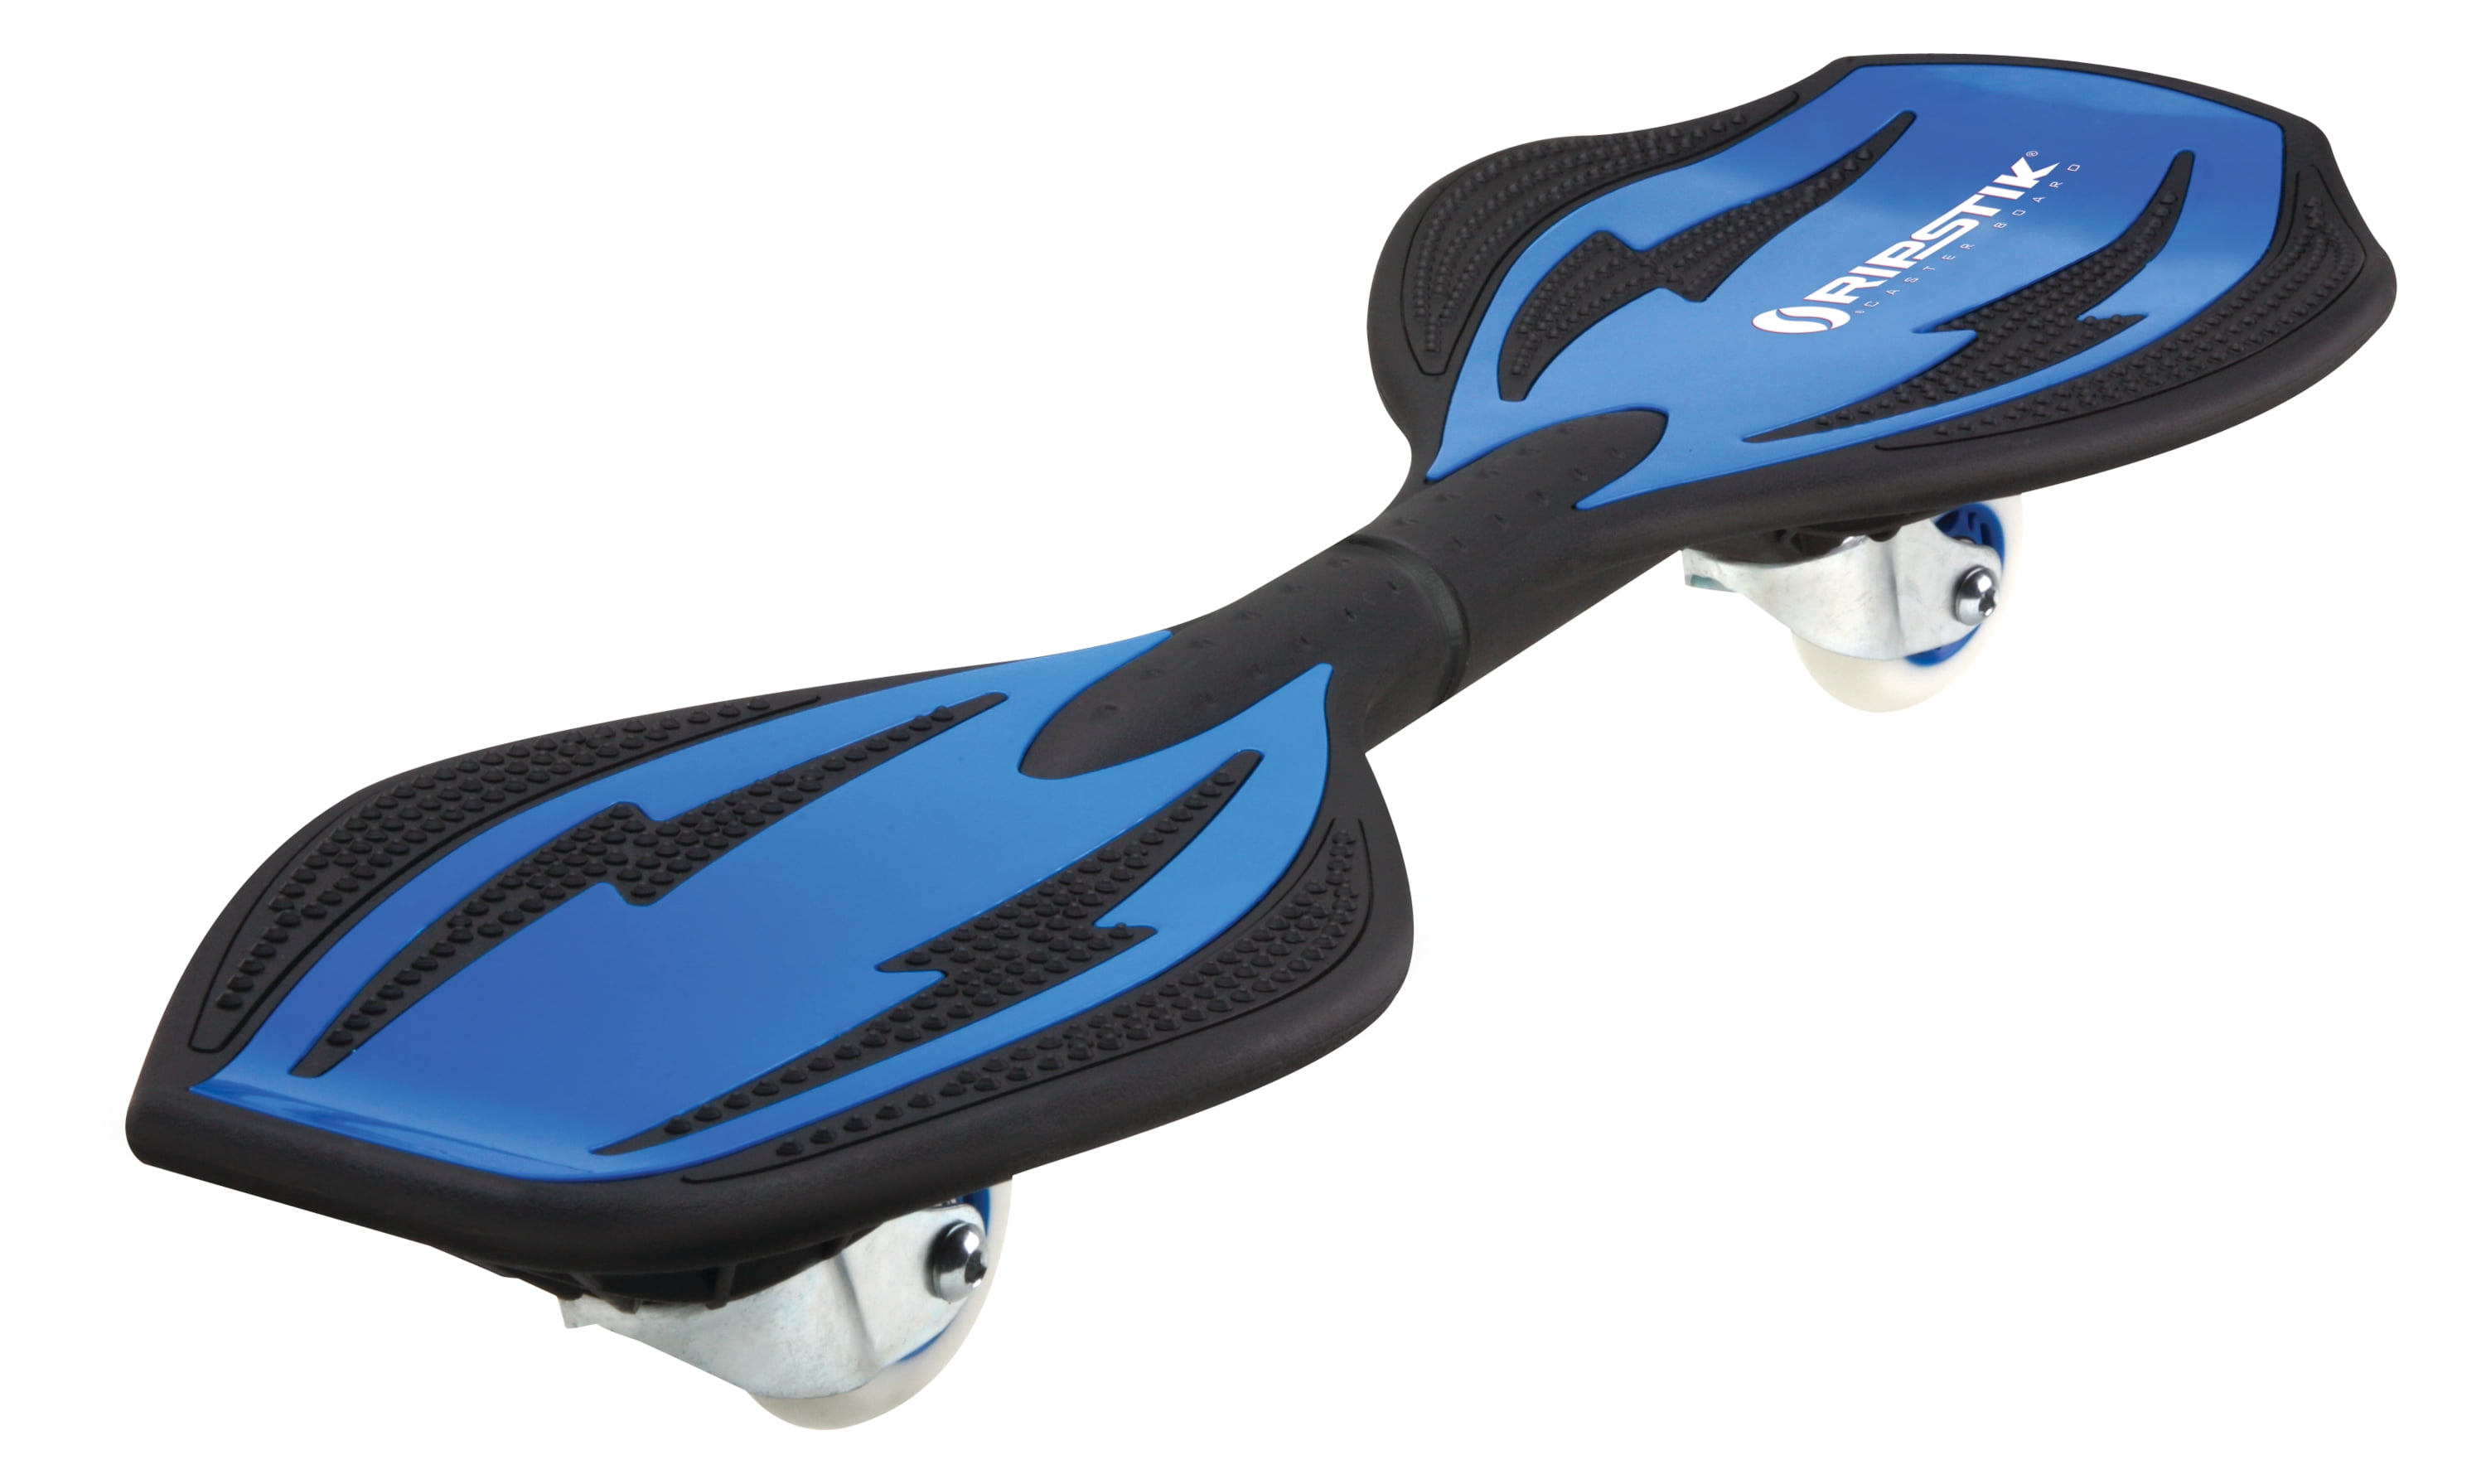 Razor RipStik Caster Board Classic - Blue/Black, 2 Wheel Skateboard with 76 mm 360-Degree Inclined for Teens, and Adults - Walmart.com